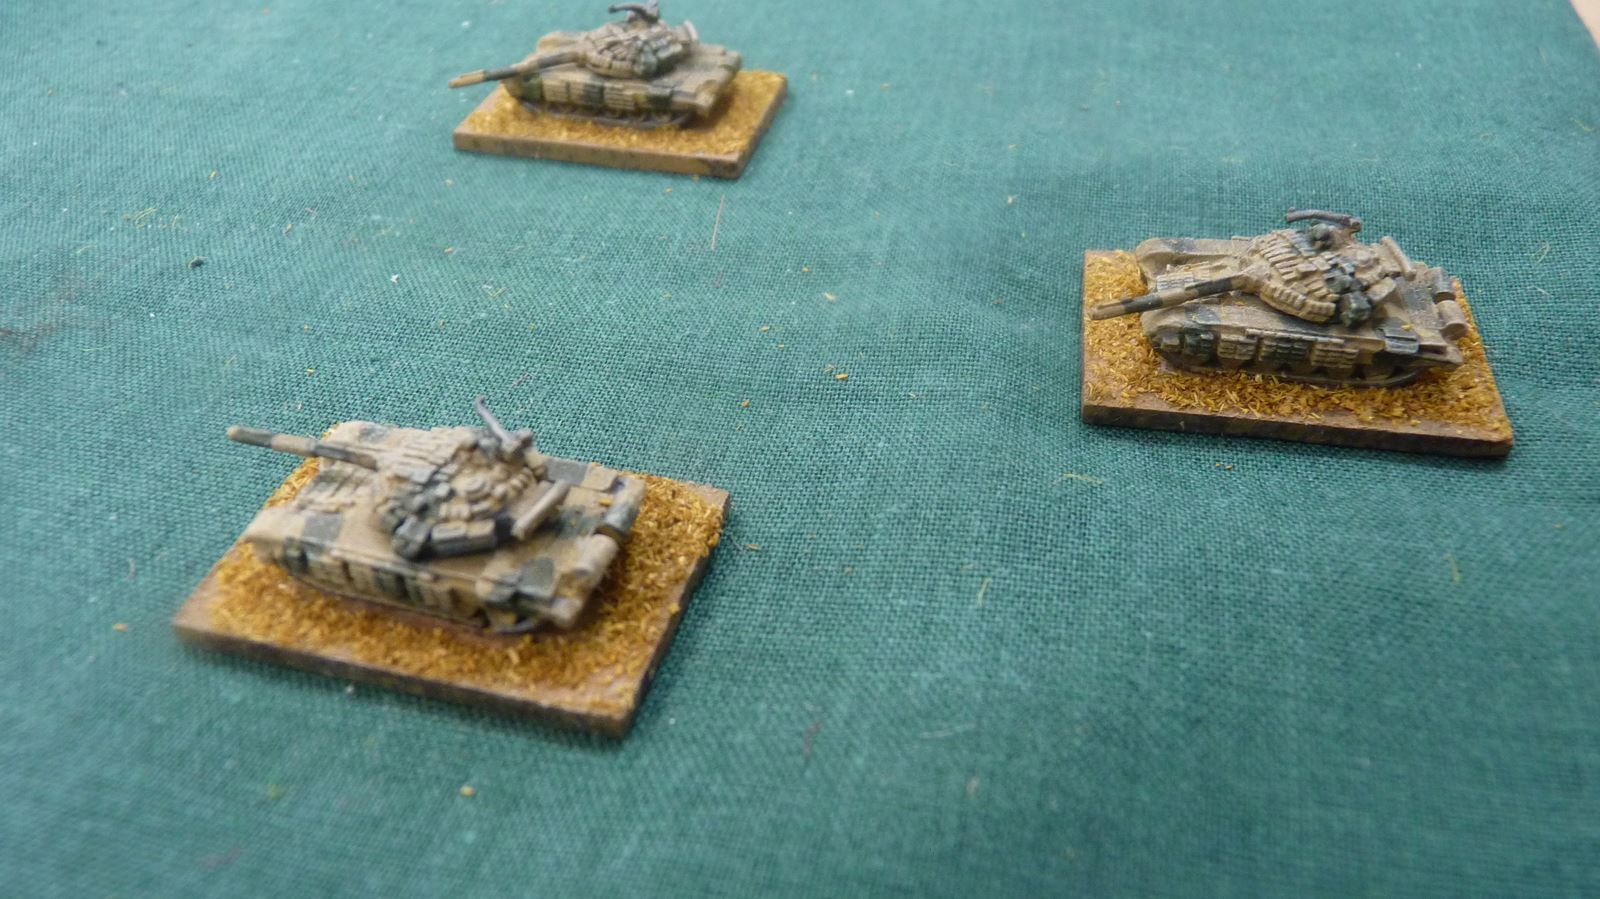 Indian tanks enter the table and fire unsuccessfully at the Chinese